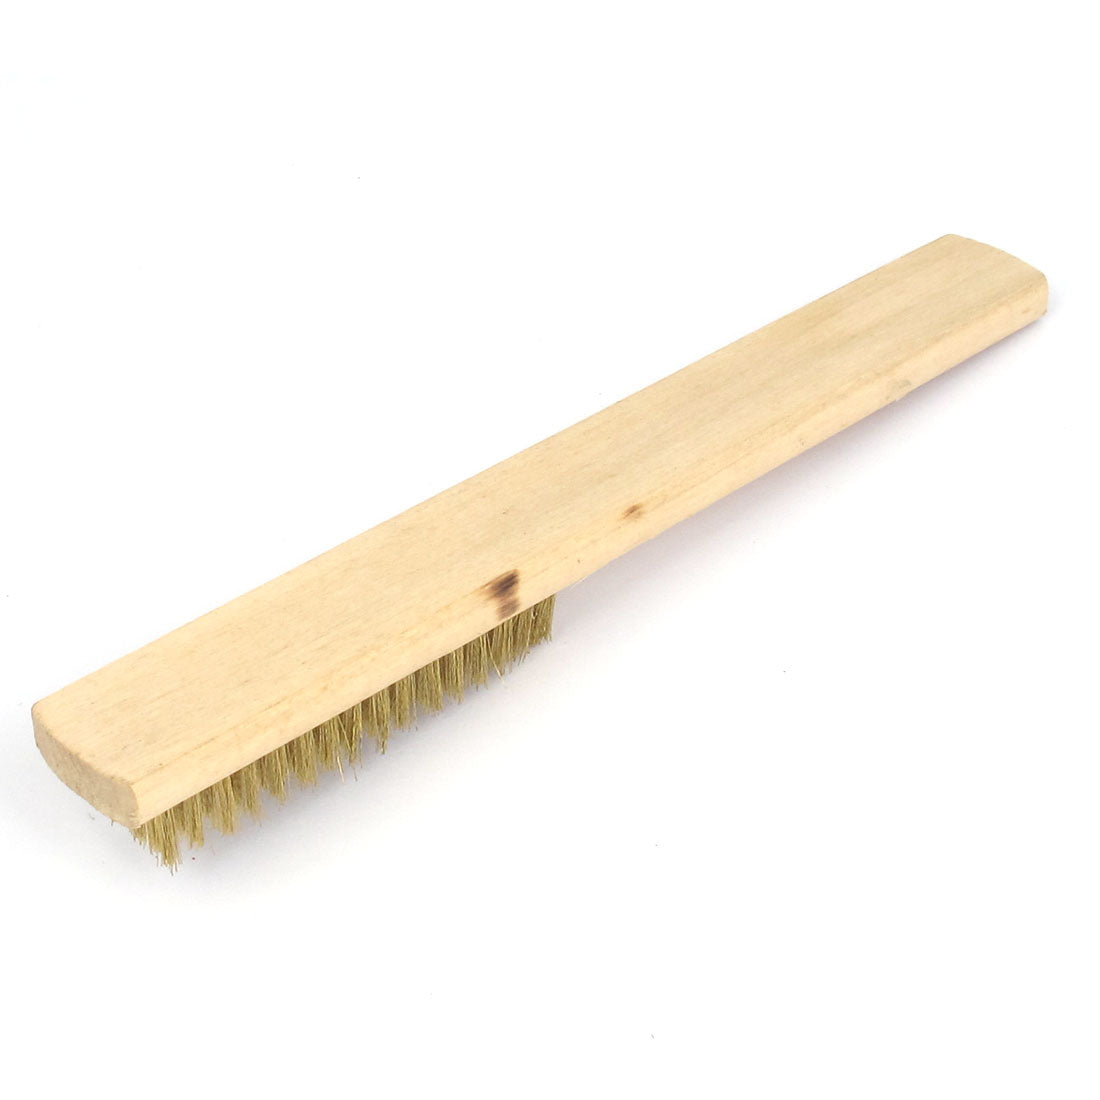 uxcell Uxcell Wooden Handle 6 Row Brass Wire Cleaning Polishing Scratch Brush 21cm Long